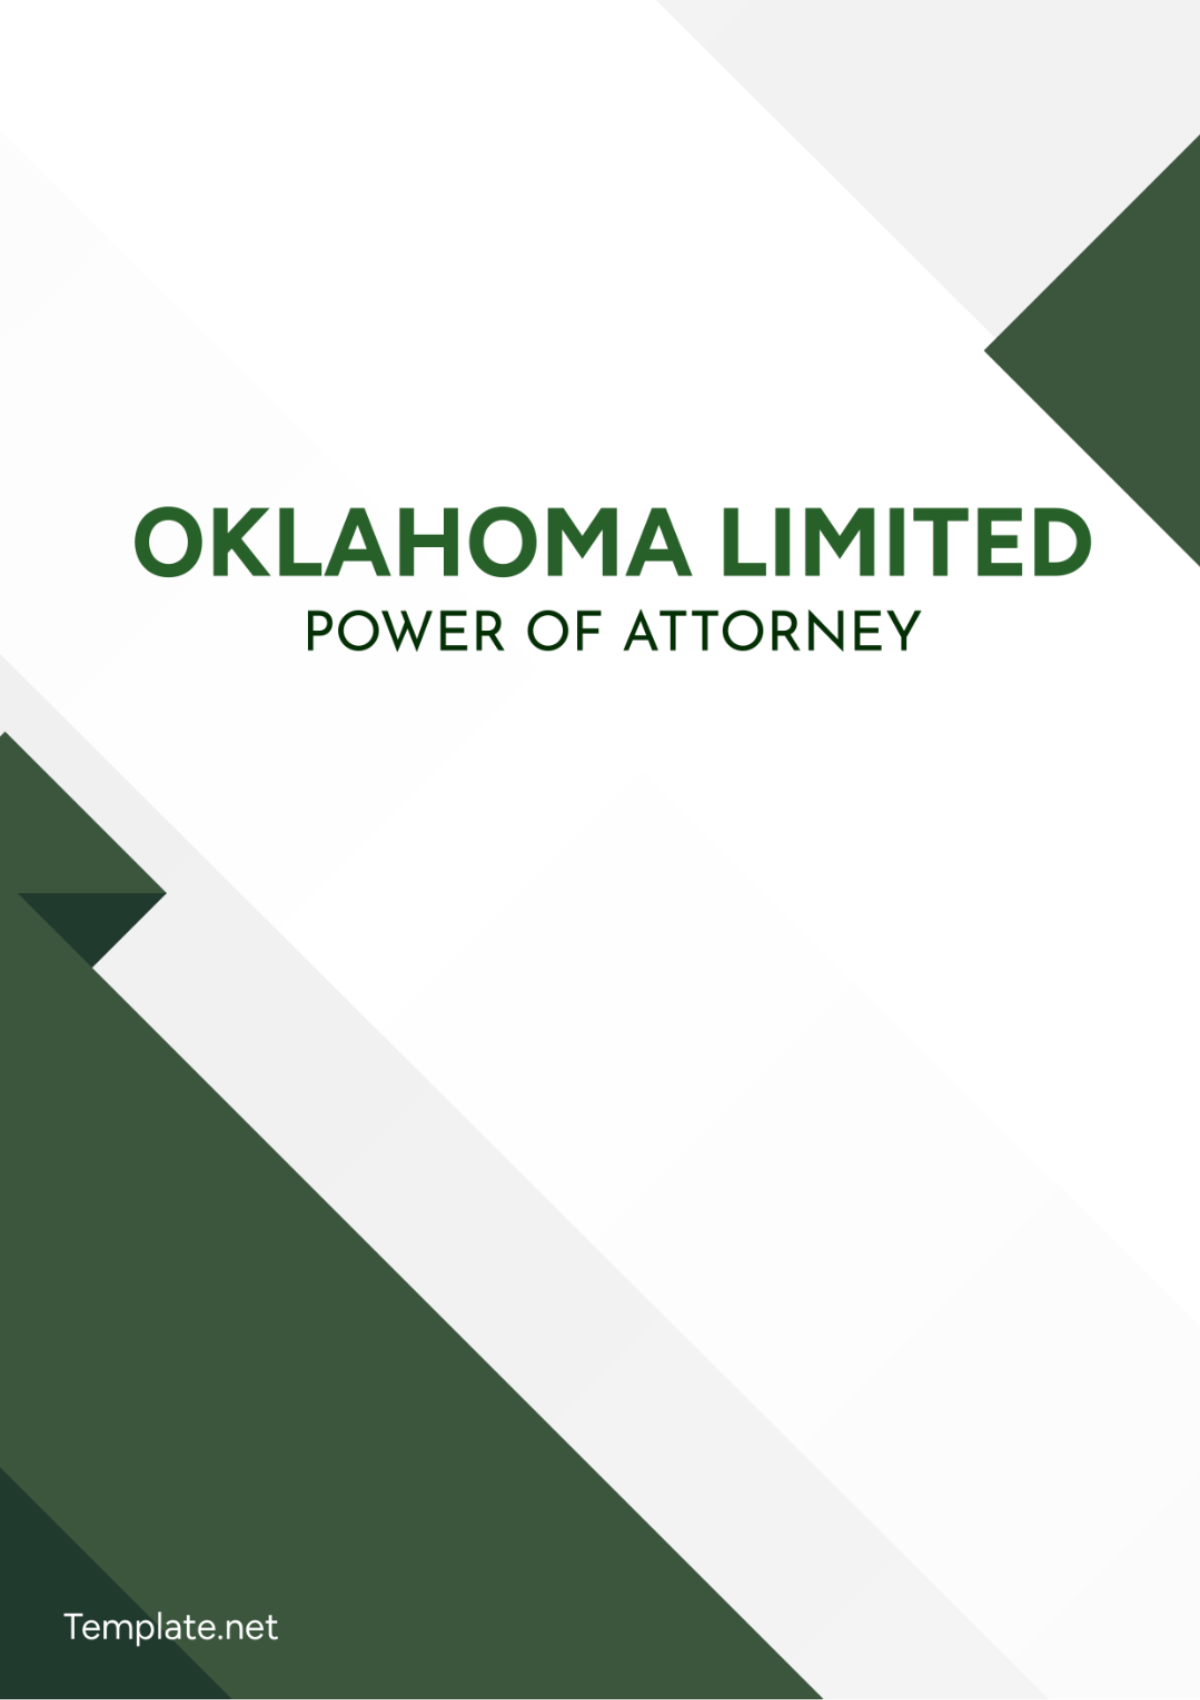 Oklahoma Limited Power of Attorney Template